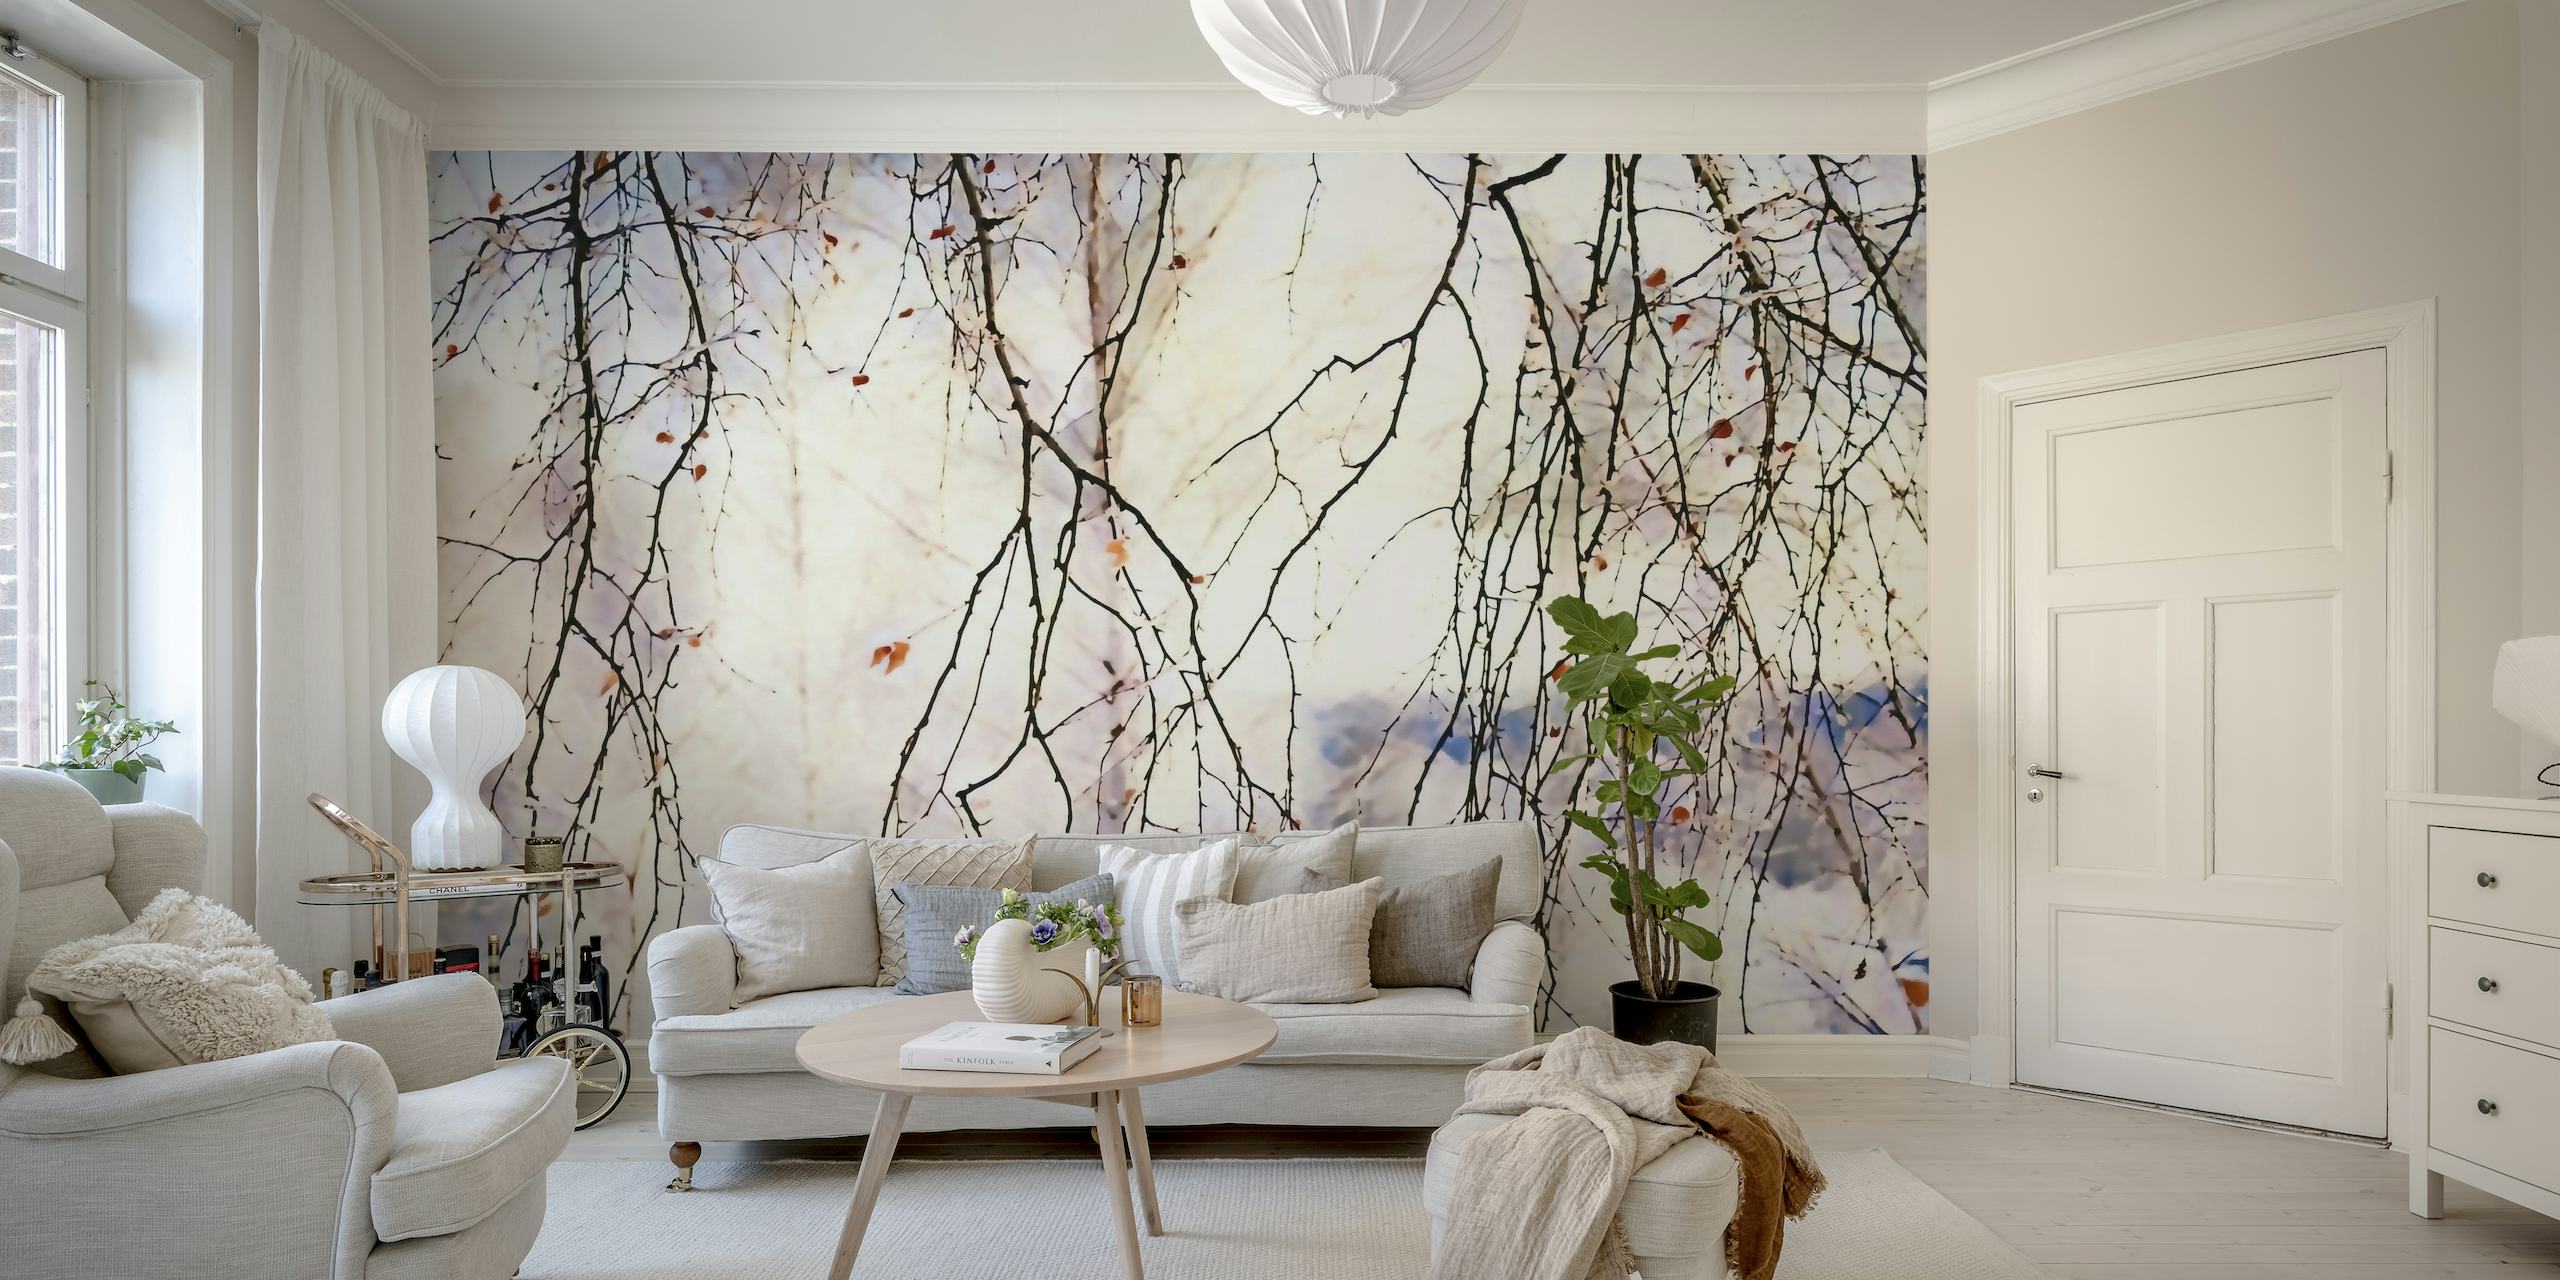 Birch Tree wall mural with intertwined branches and a soft winter sunset background